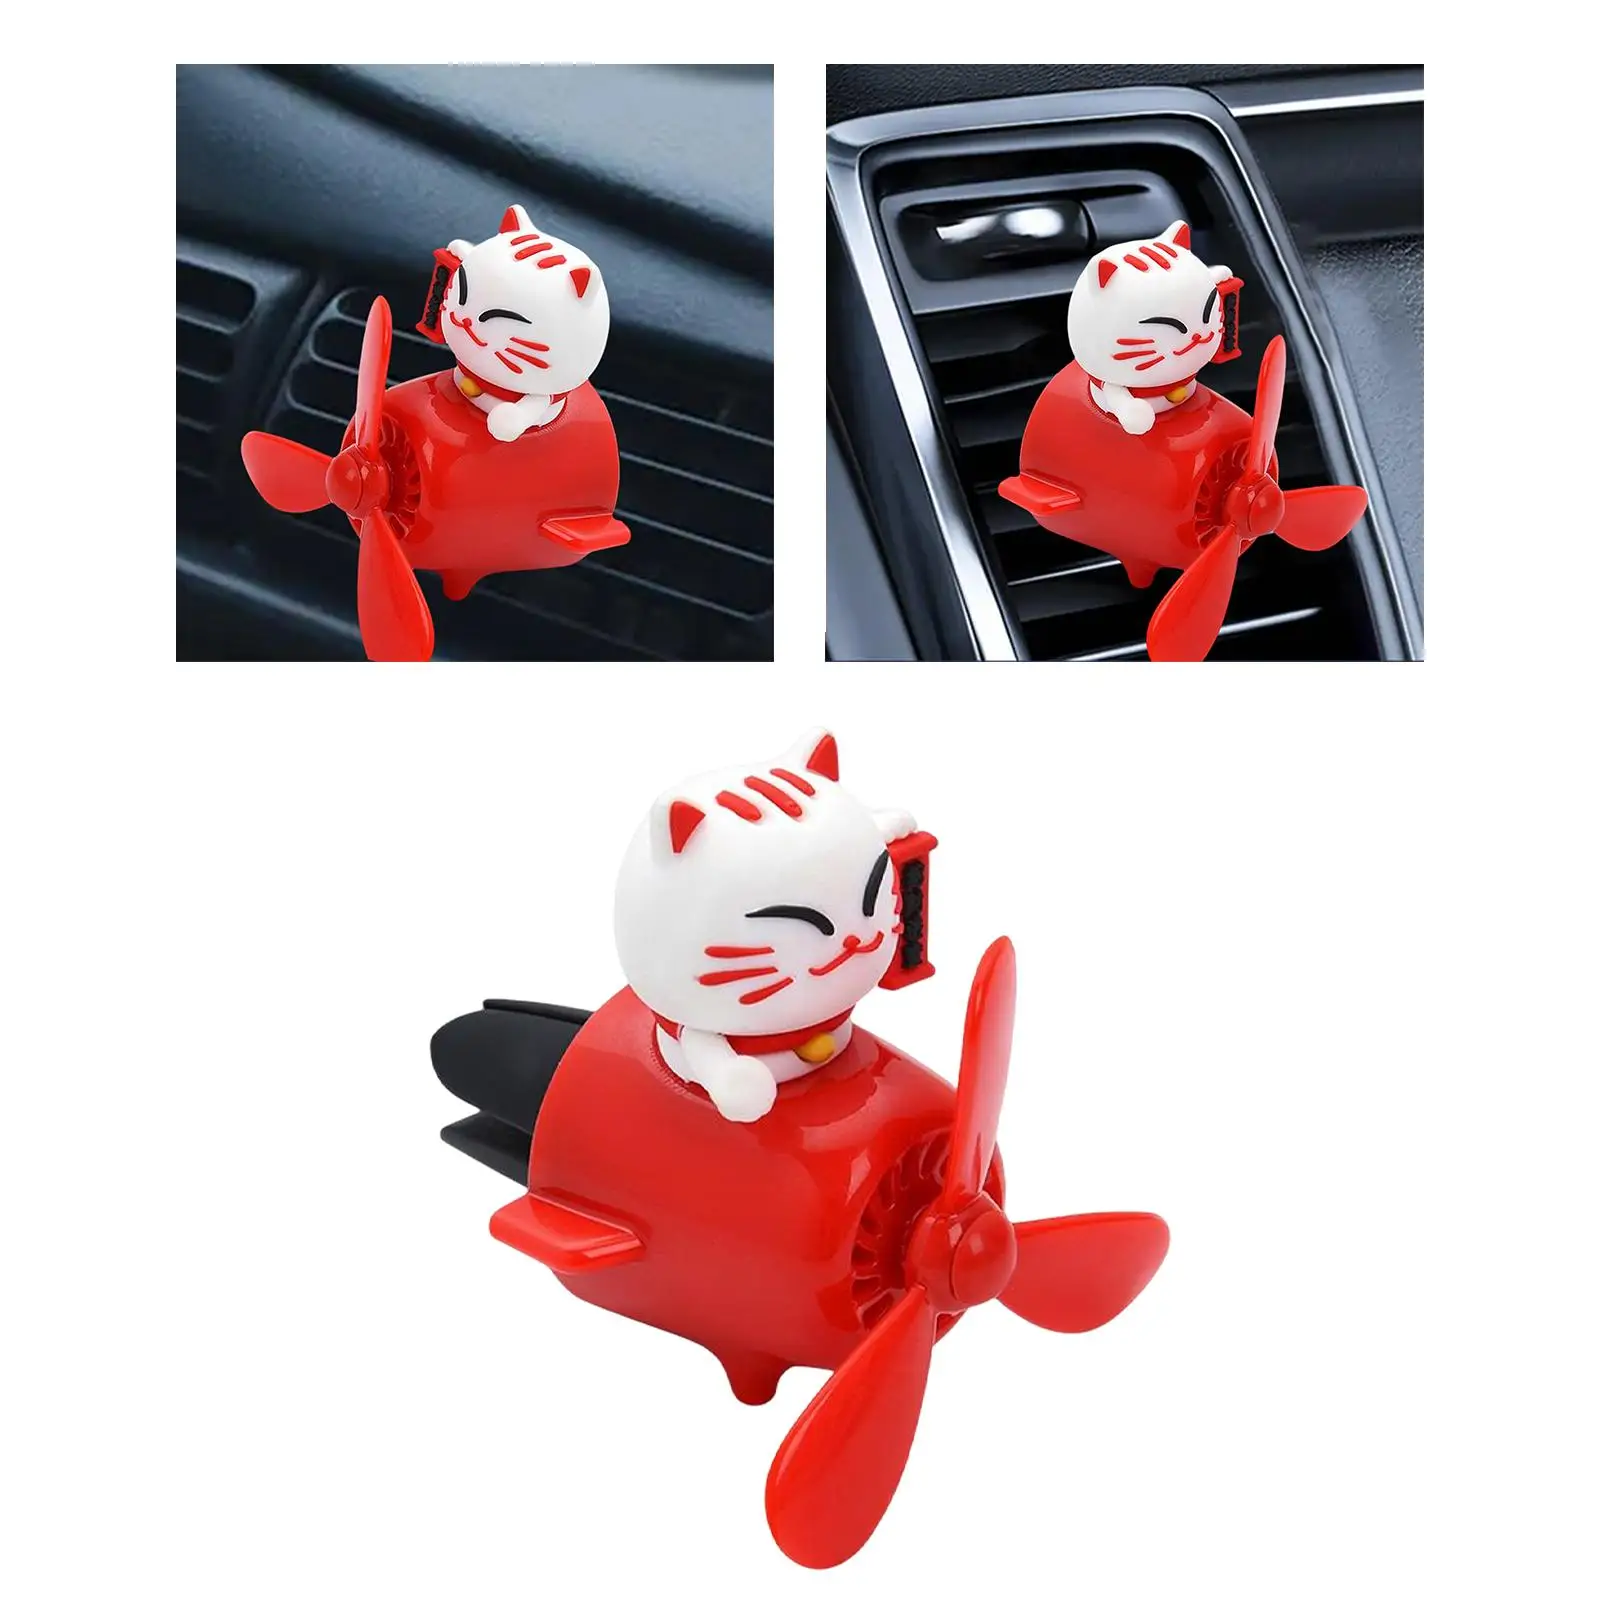 Cat Air Freshener Diffuser Car Accessories Fragrance Gift Rotating Propeller Air Outlet Vent for Women Men Automotive Vehicle